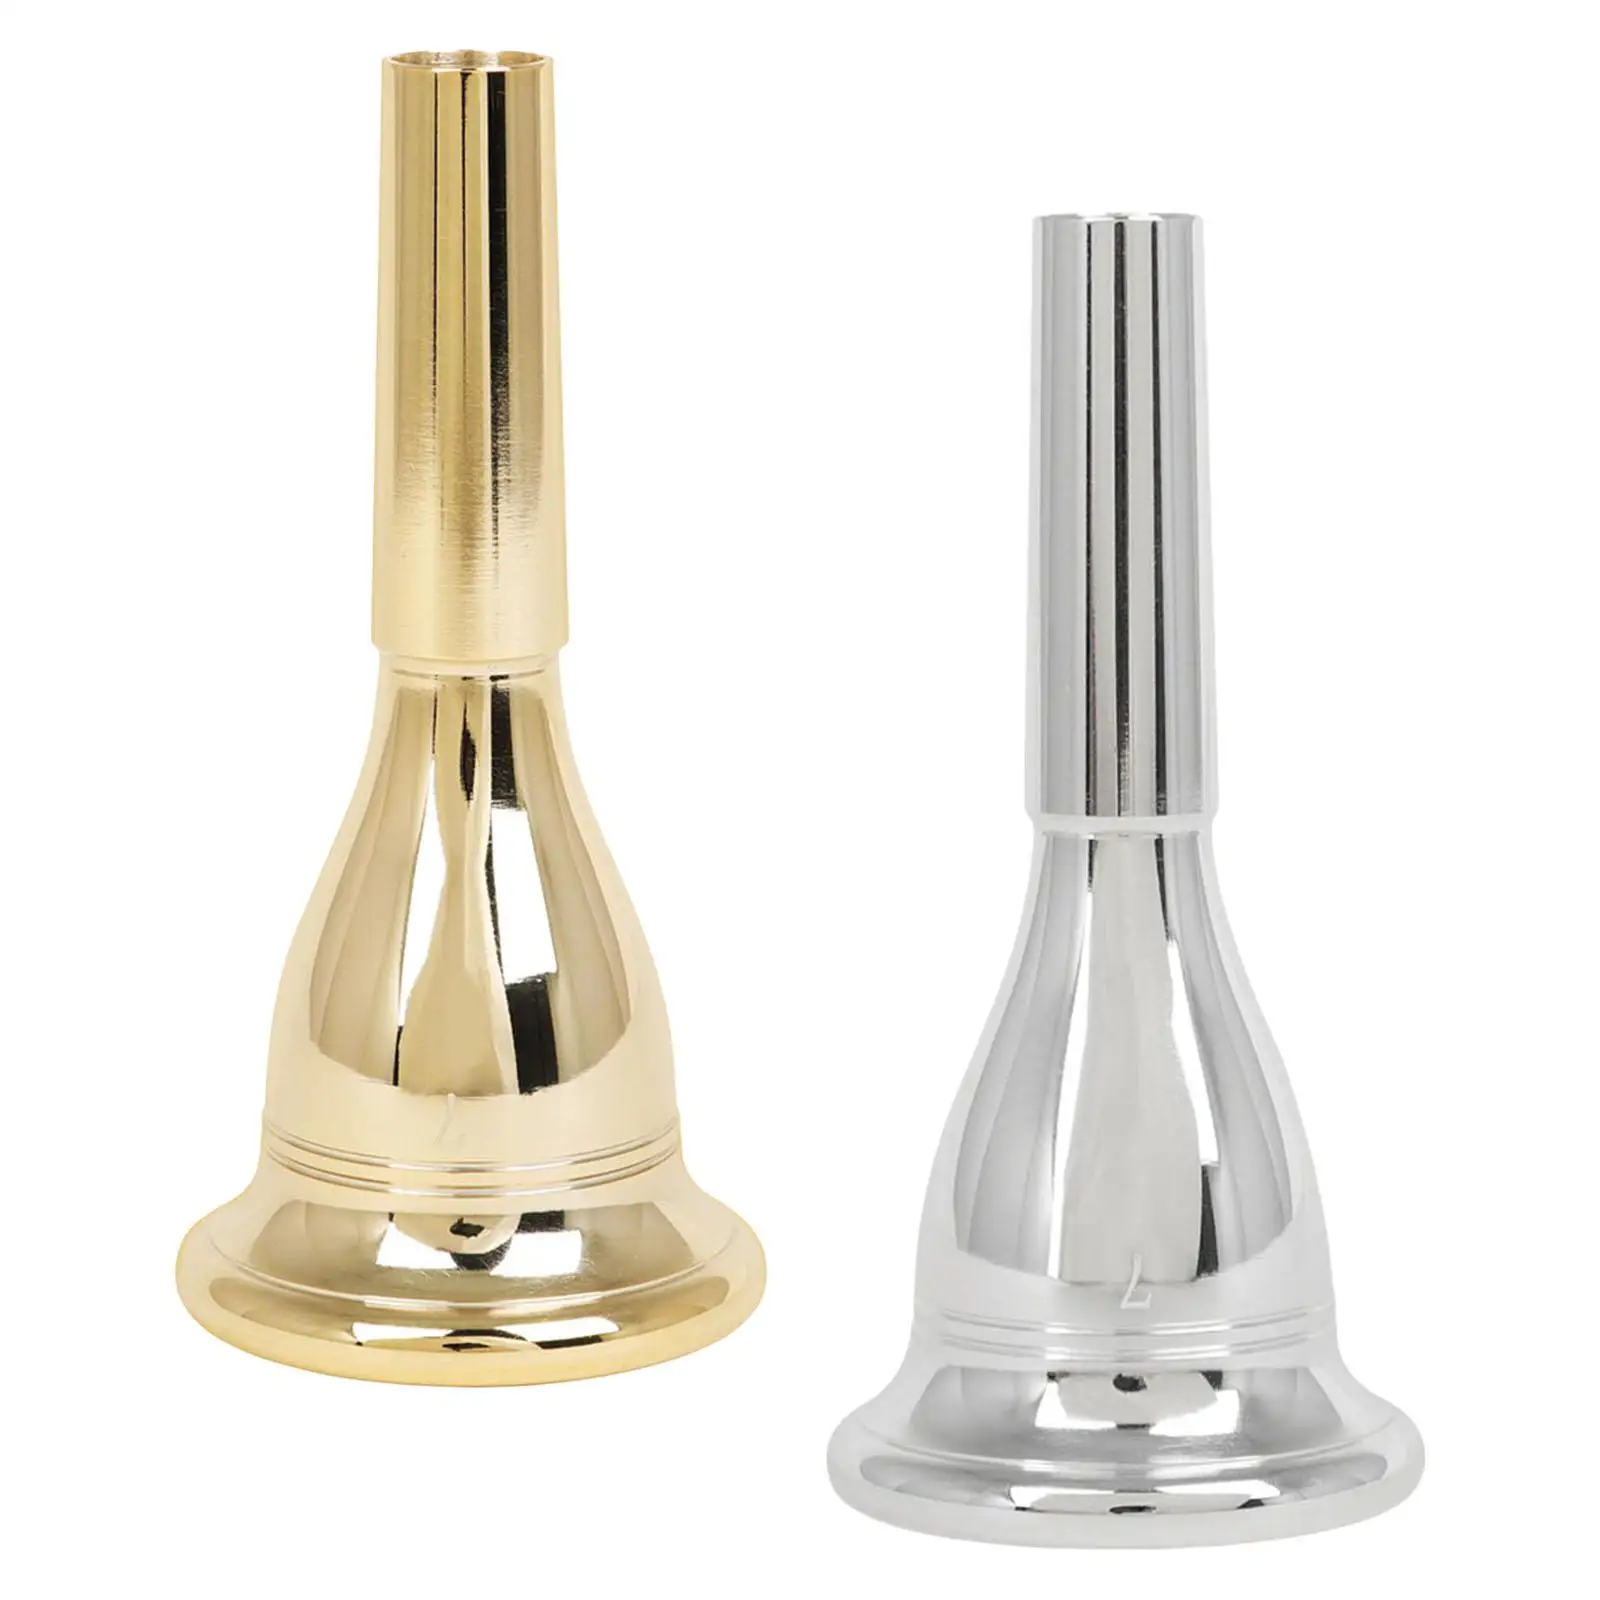 Brass Tuba Mouthpiece, Replacement Good Air Tightness Instrument Accessories Precise sound Number 7 for Professional